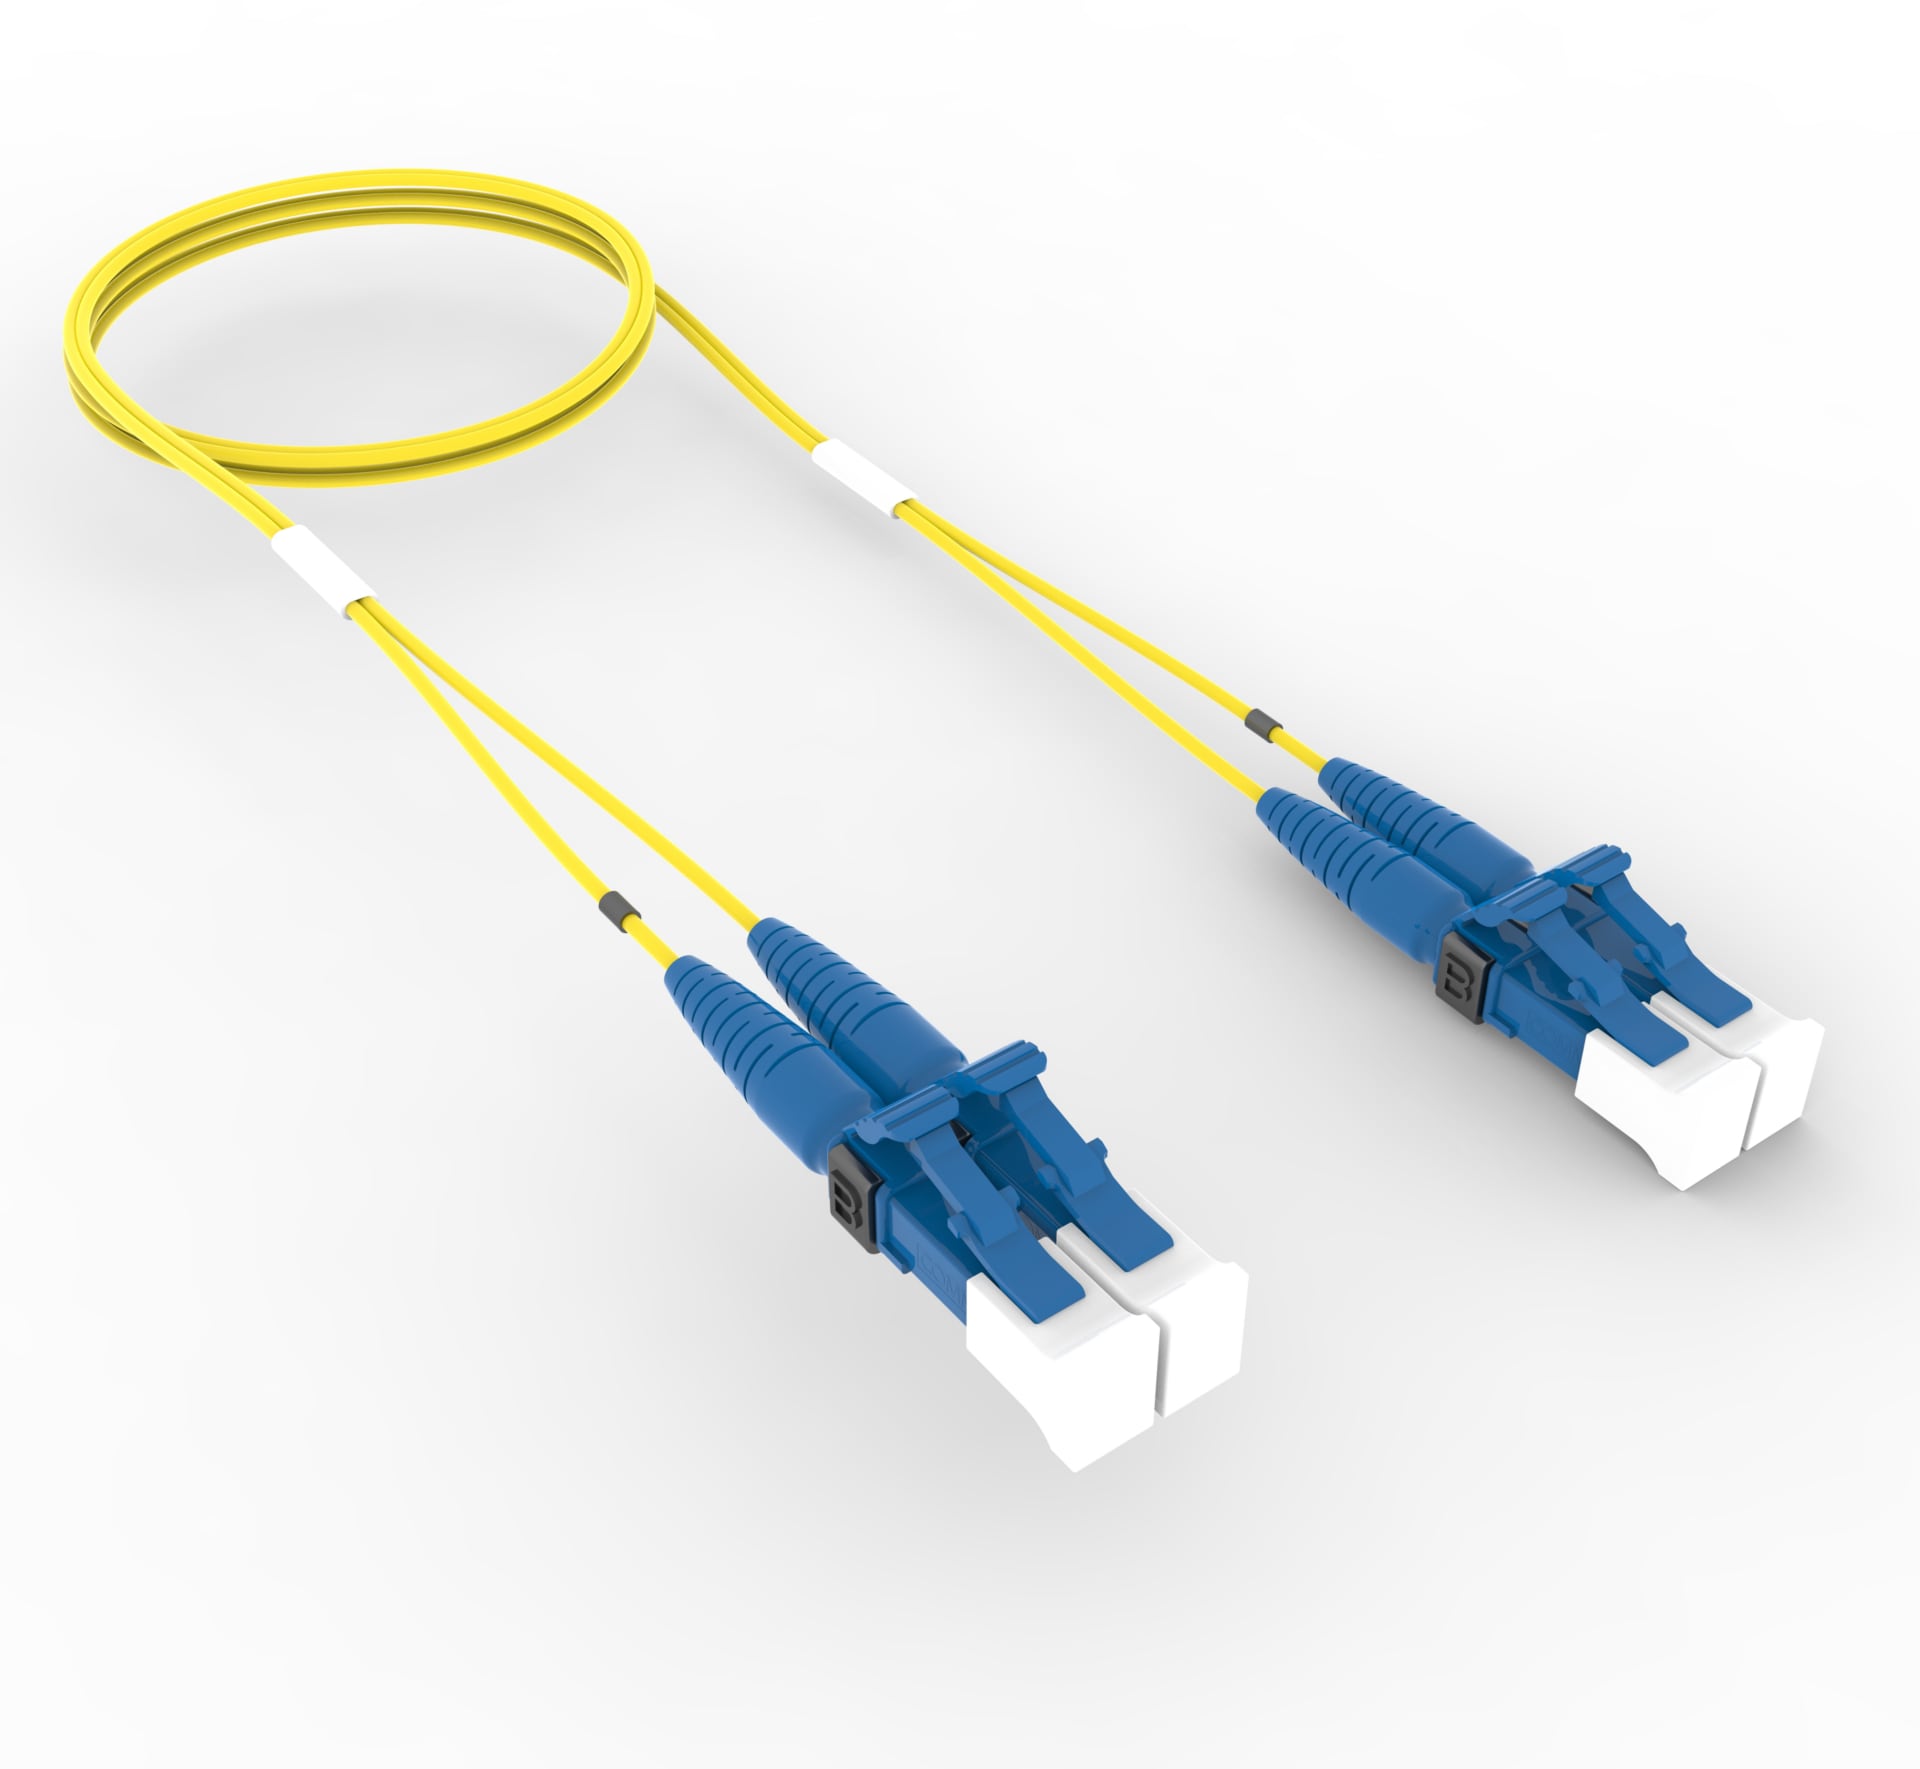 CommScope SYSTIMAX InstaPATCH 360 5m 1.6mm Duplex 2-Fiber Patch Cord - Yellow